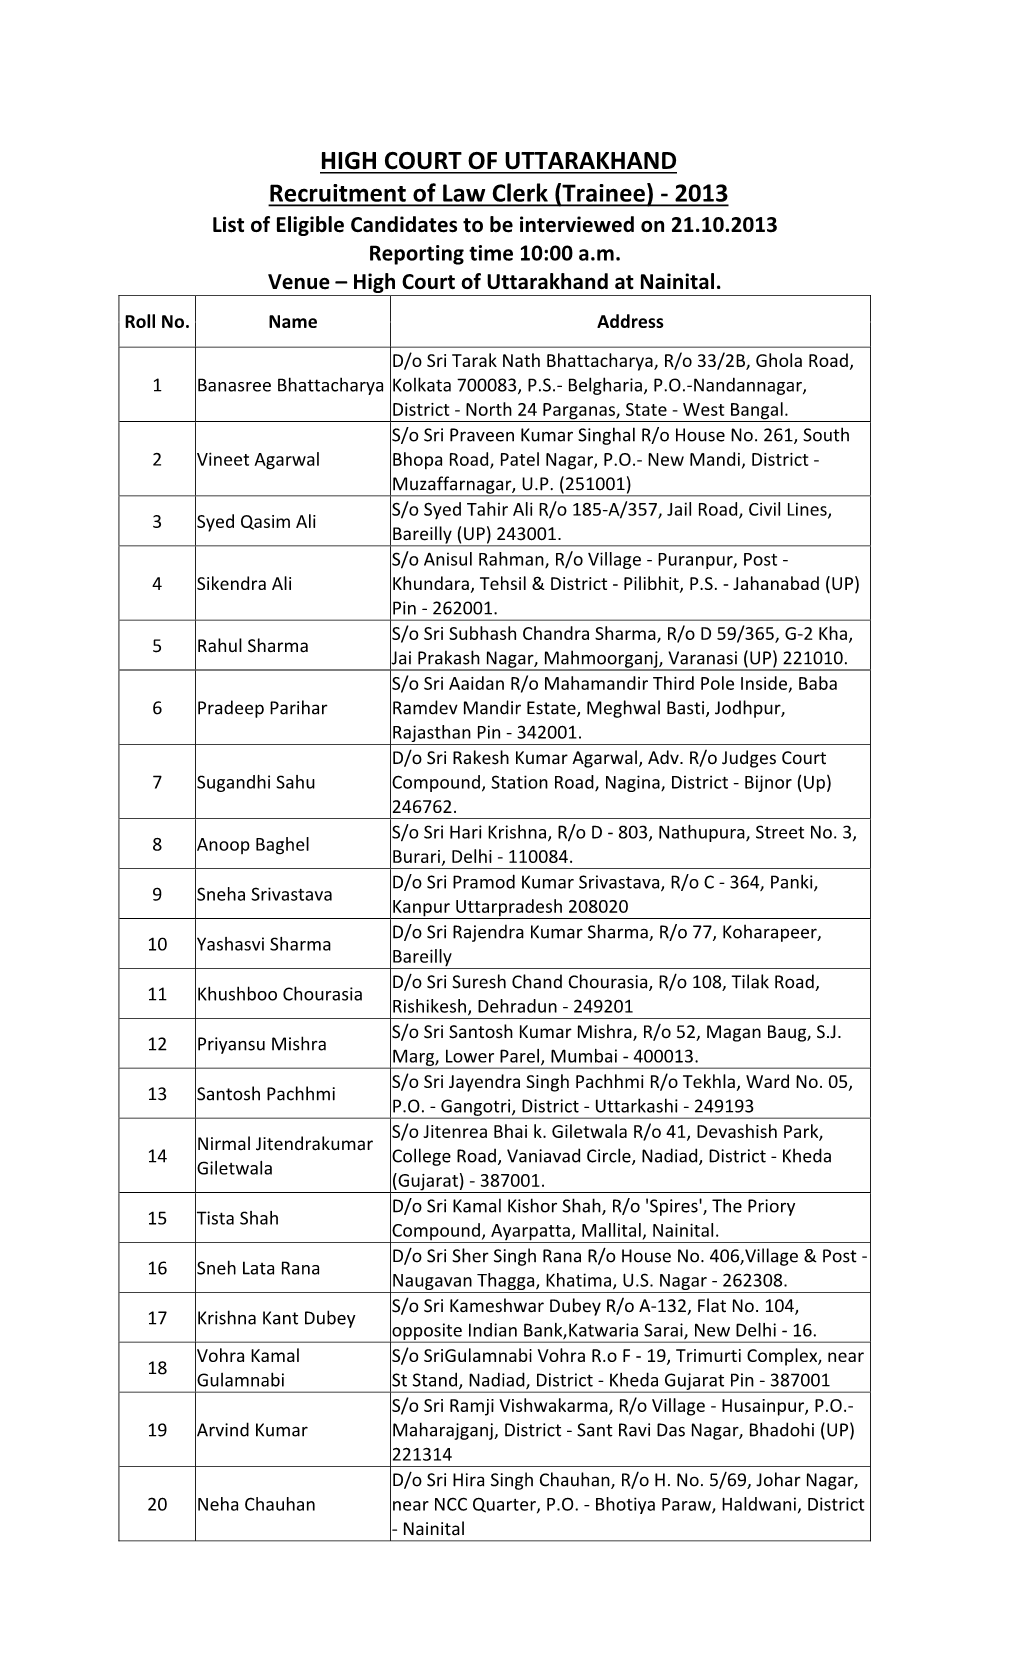 Recruitment of Law Clerk (Trainee) ‐ 2013 List of Eligible Candidates to Be Interviewed on 21.10.2013 Reporting Time 10:00 A.M